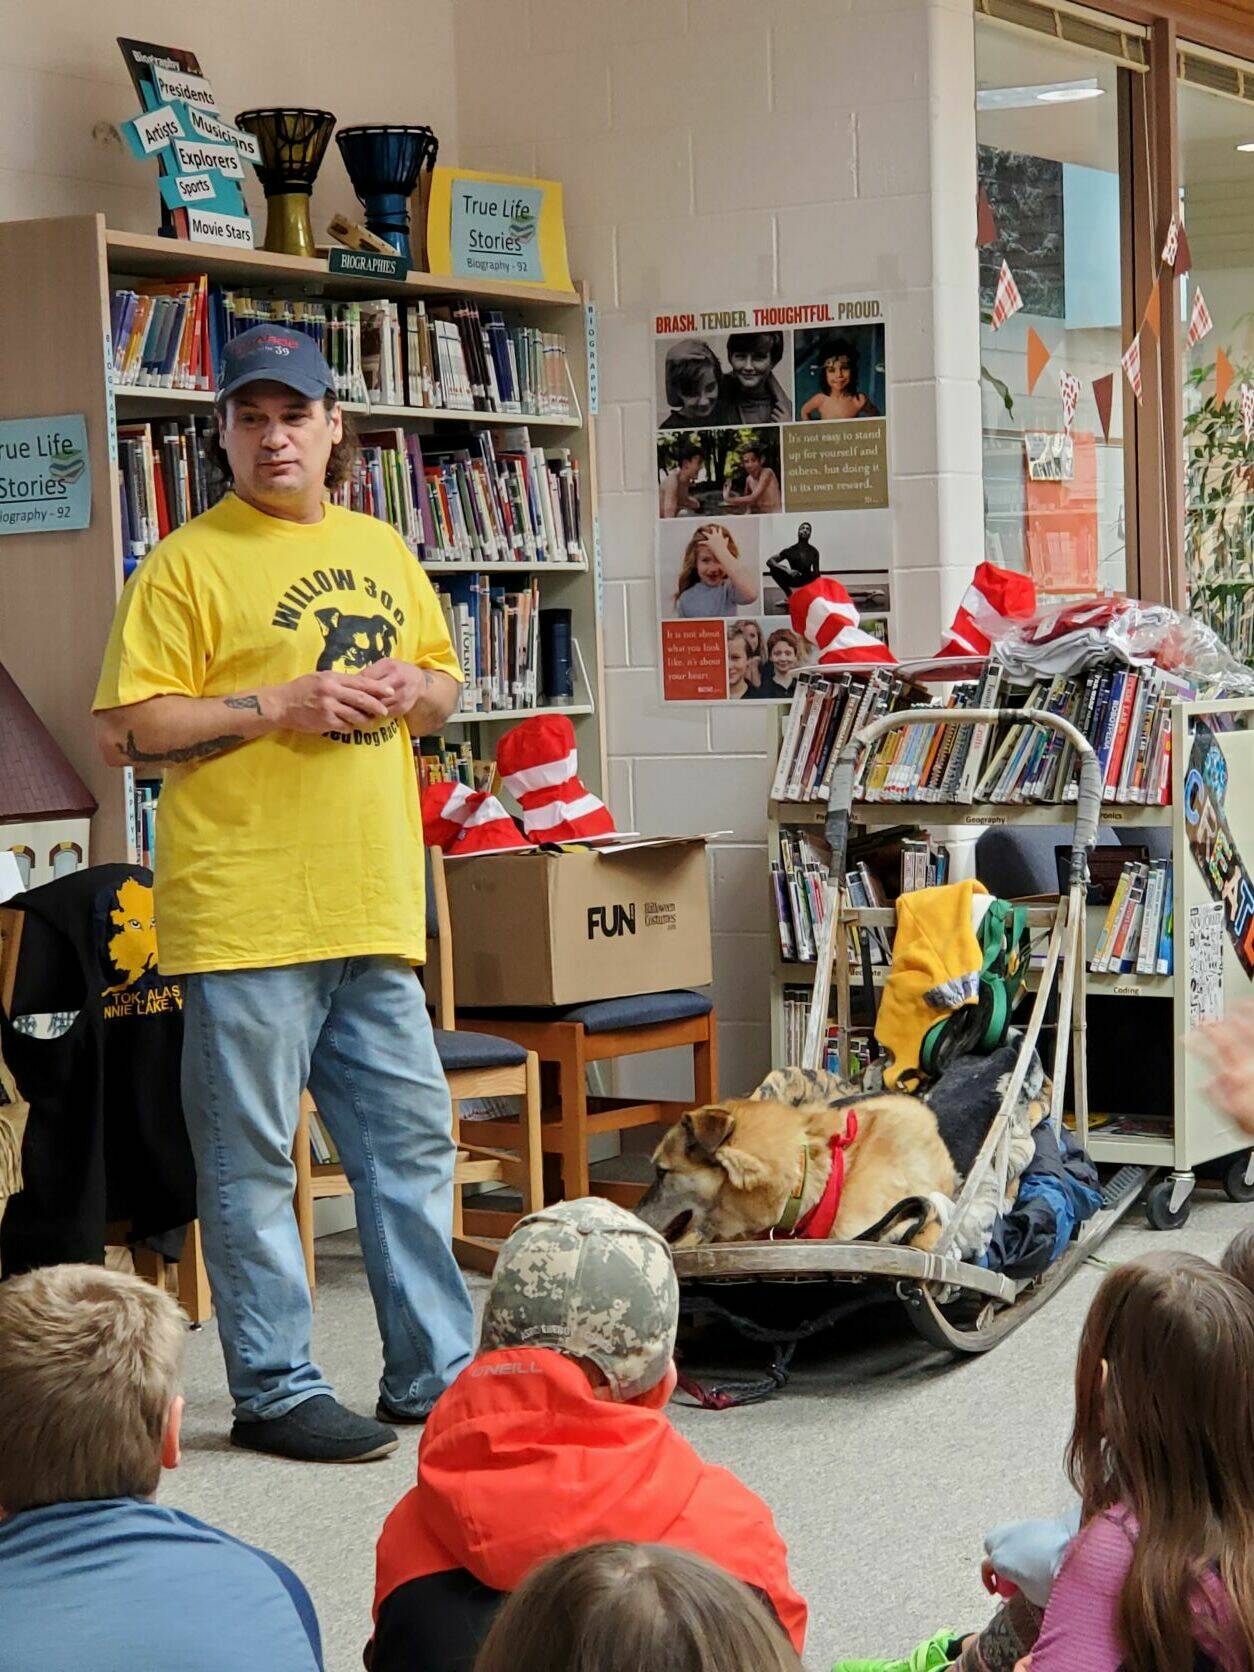 Musher Hugh Neff talks to West Homer Elementary students about reading and dog mushing at a presentation on Friday, Feb. 3 in Homer, Alaska. Photo by Delcenia Cosman